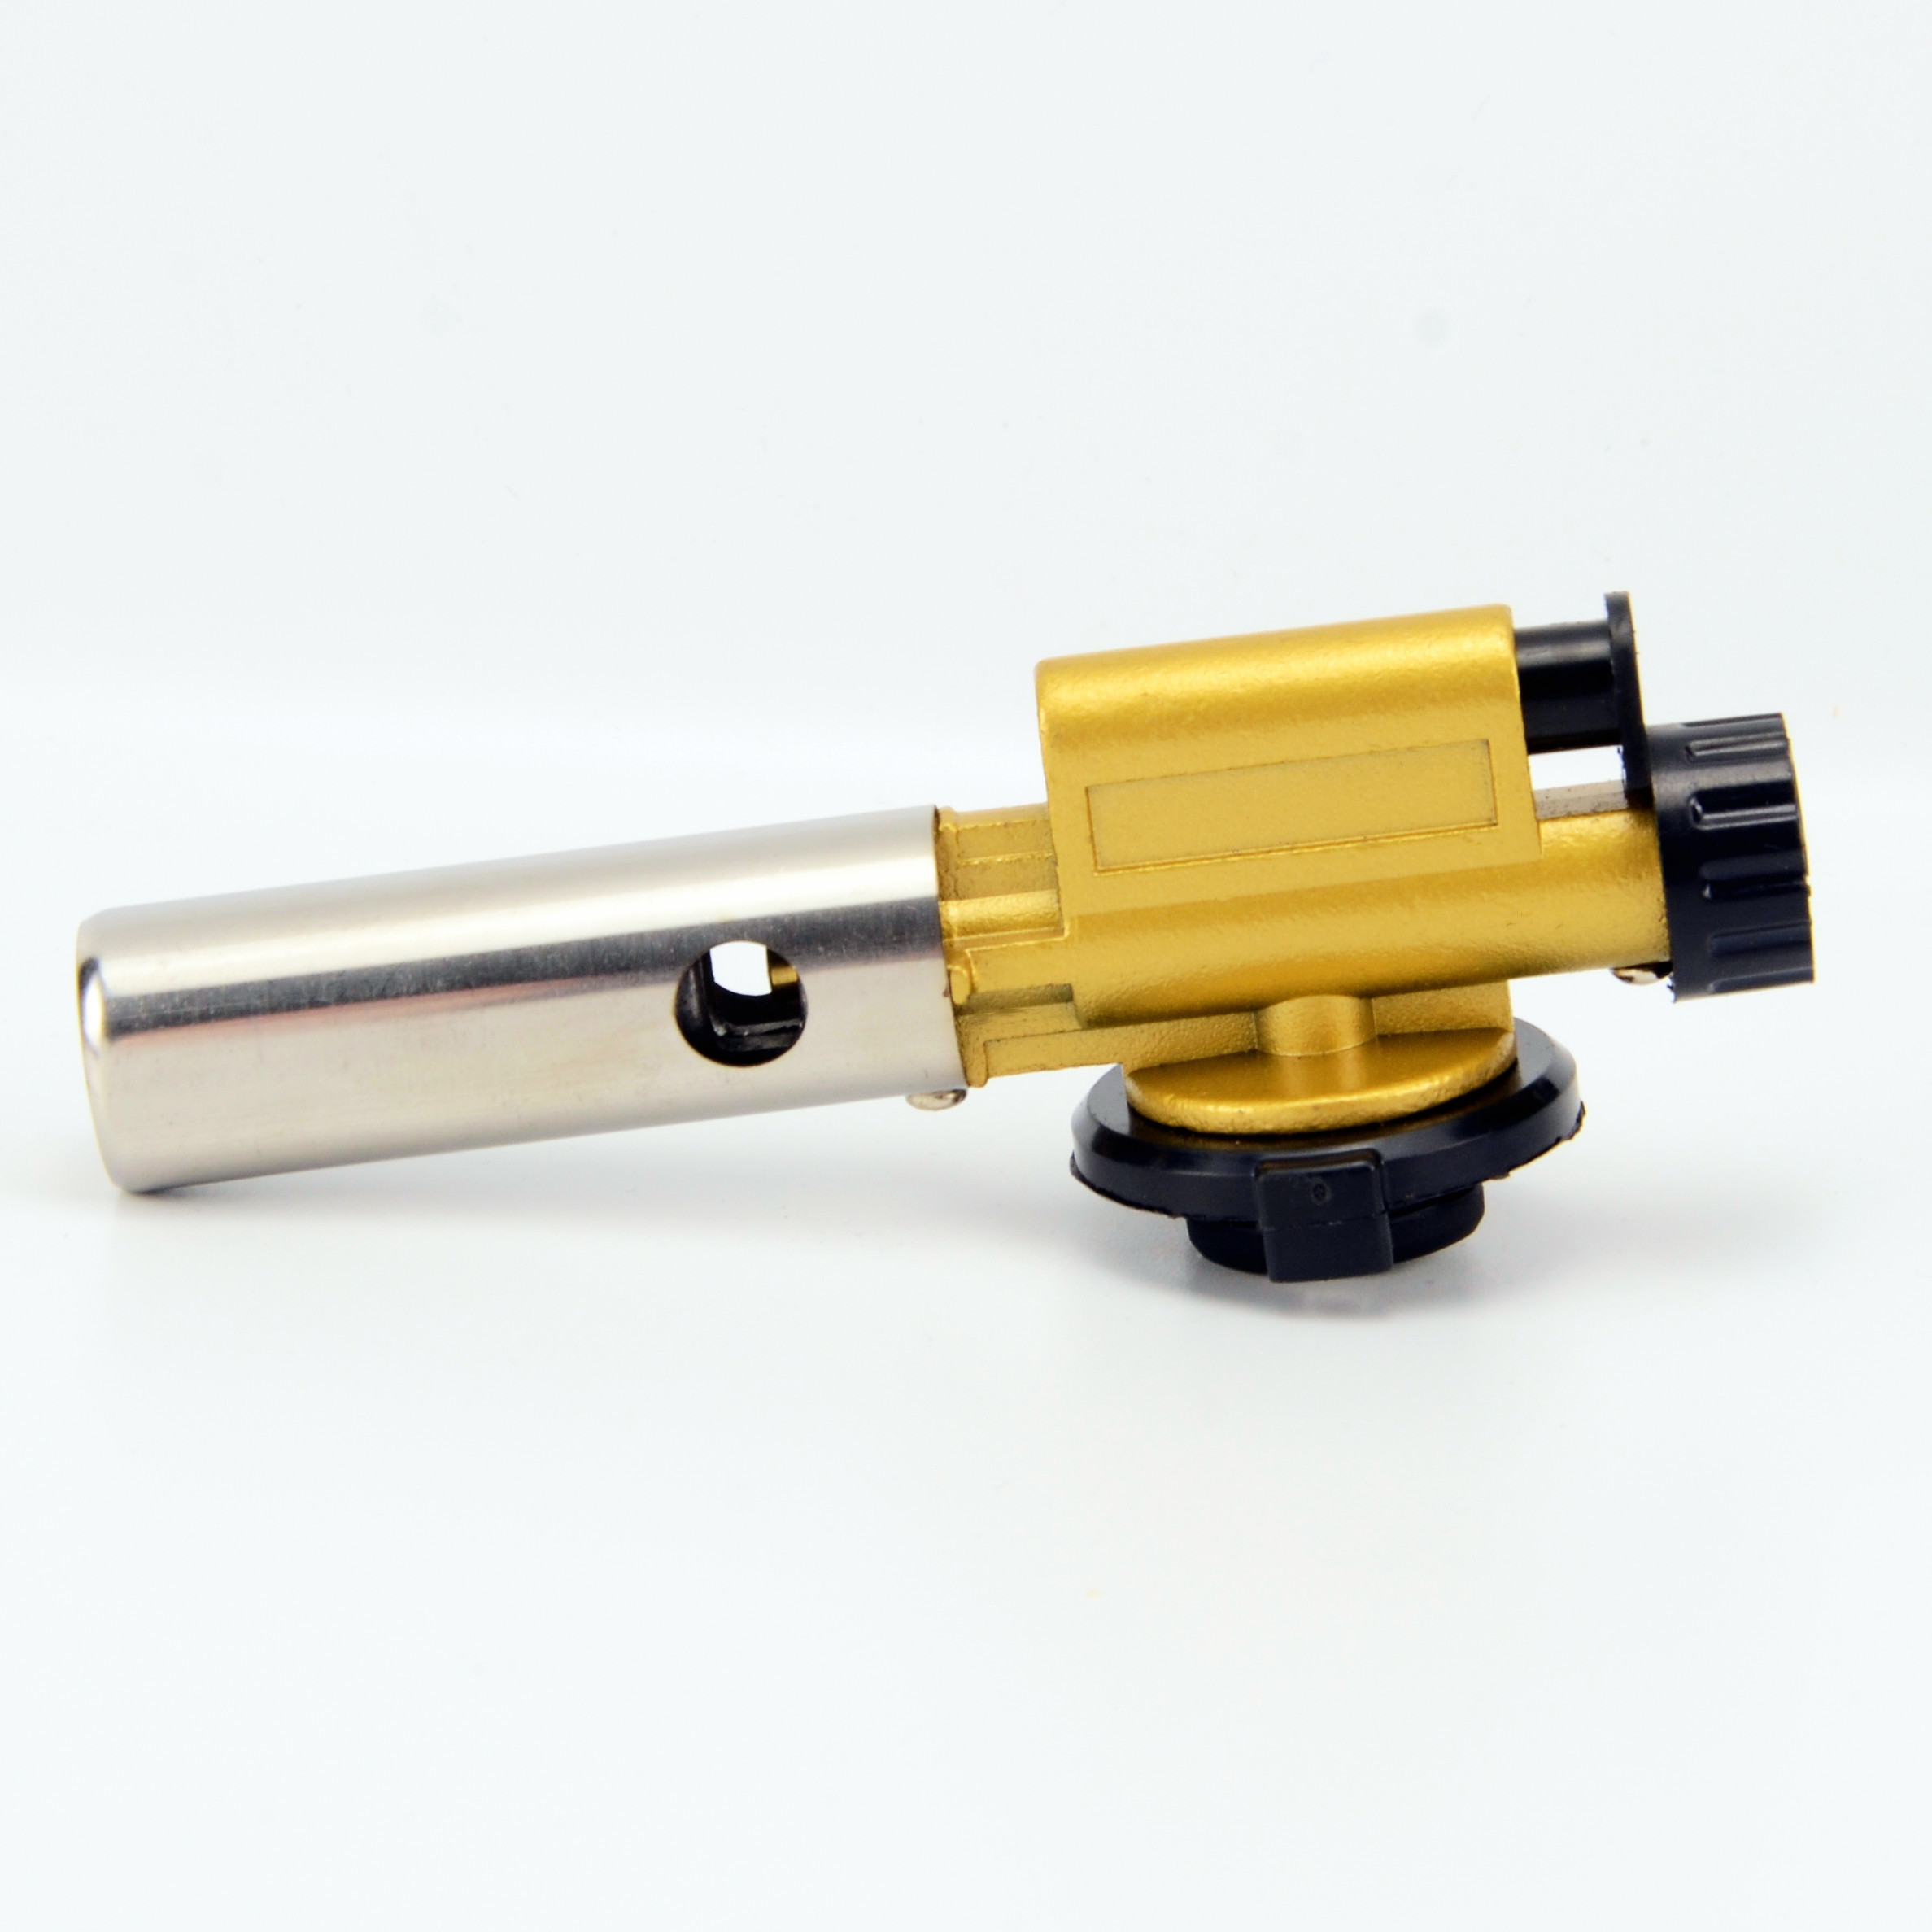  Adjustable Flame Torch For Food BBQ Chef Creme Brulee Torch Gas Butane Culinary Manufactures